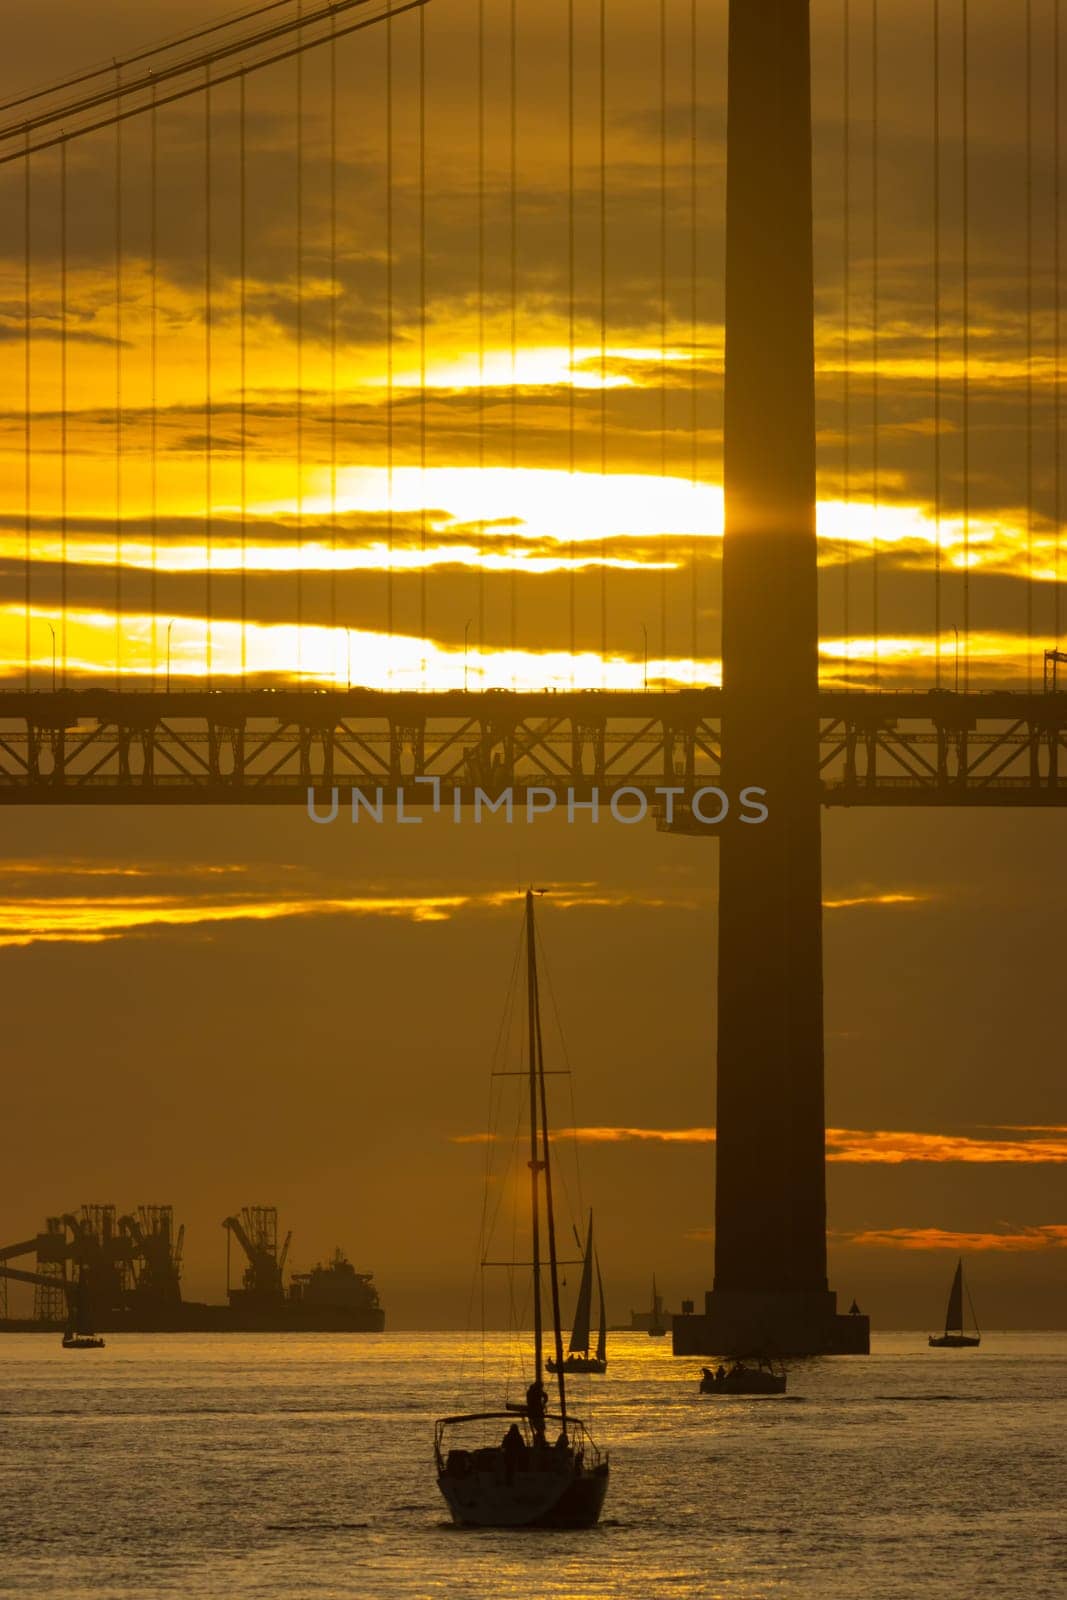 Sailing boat is sailing towards the bridge at bright yellow sunset - oil producing vessel on the background by Studia72